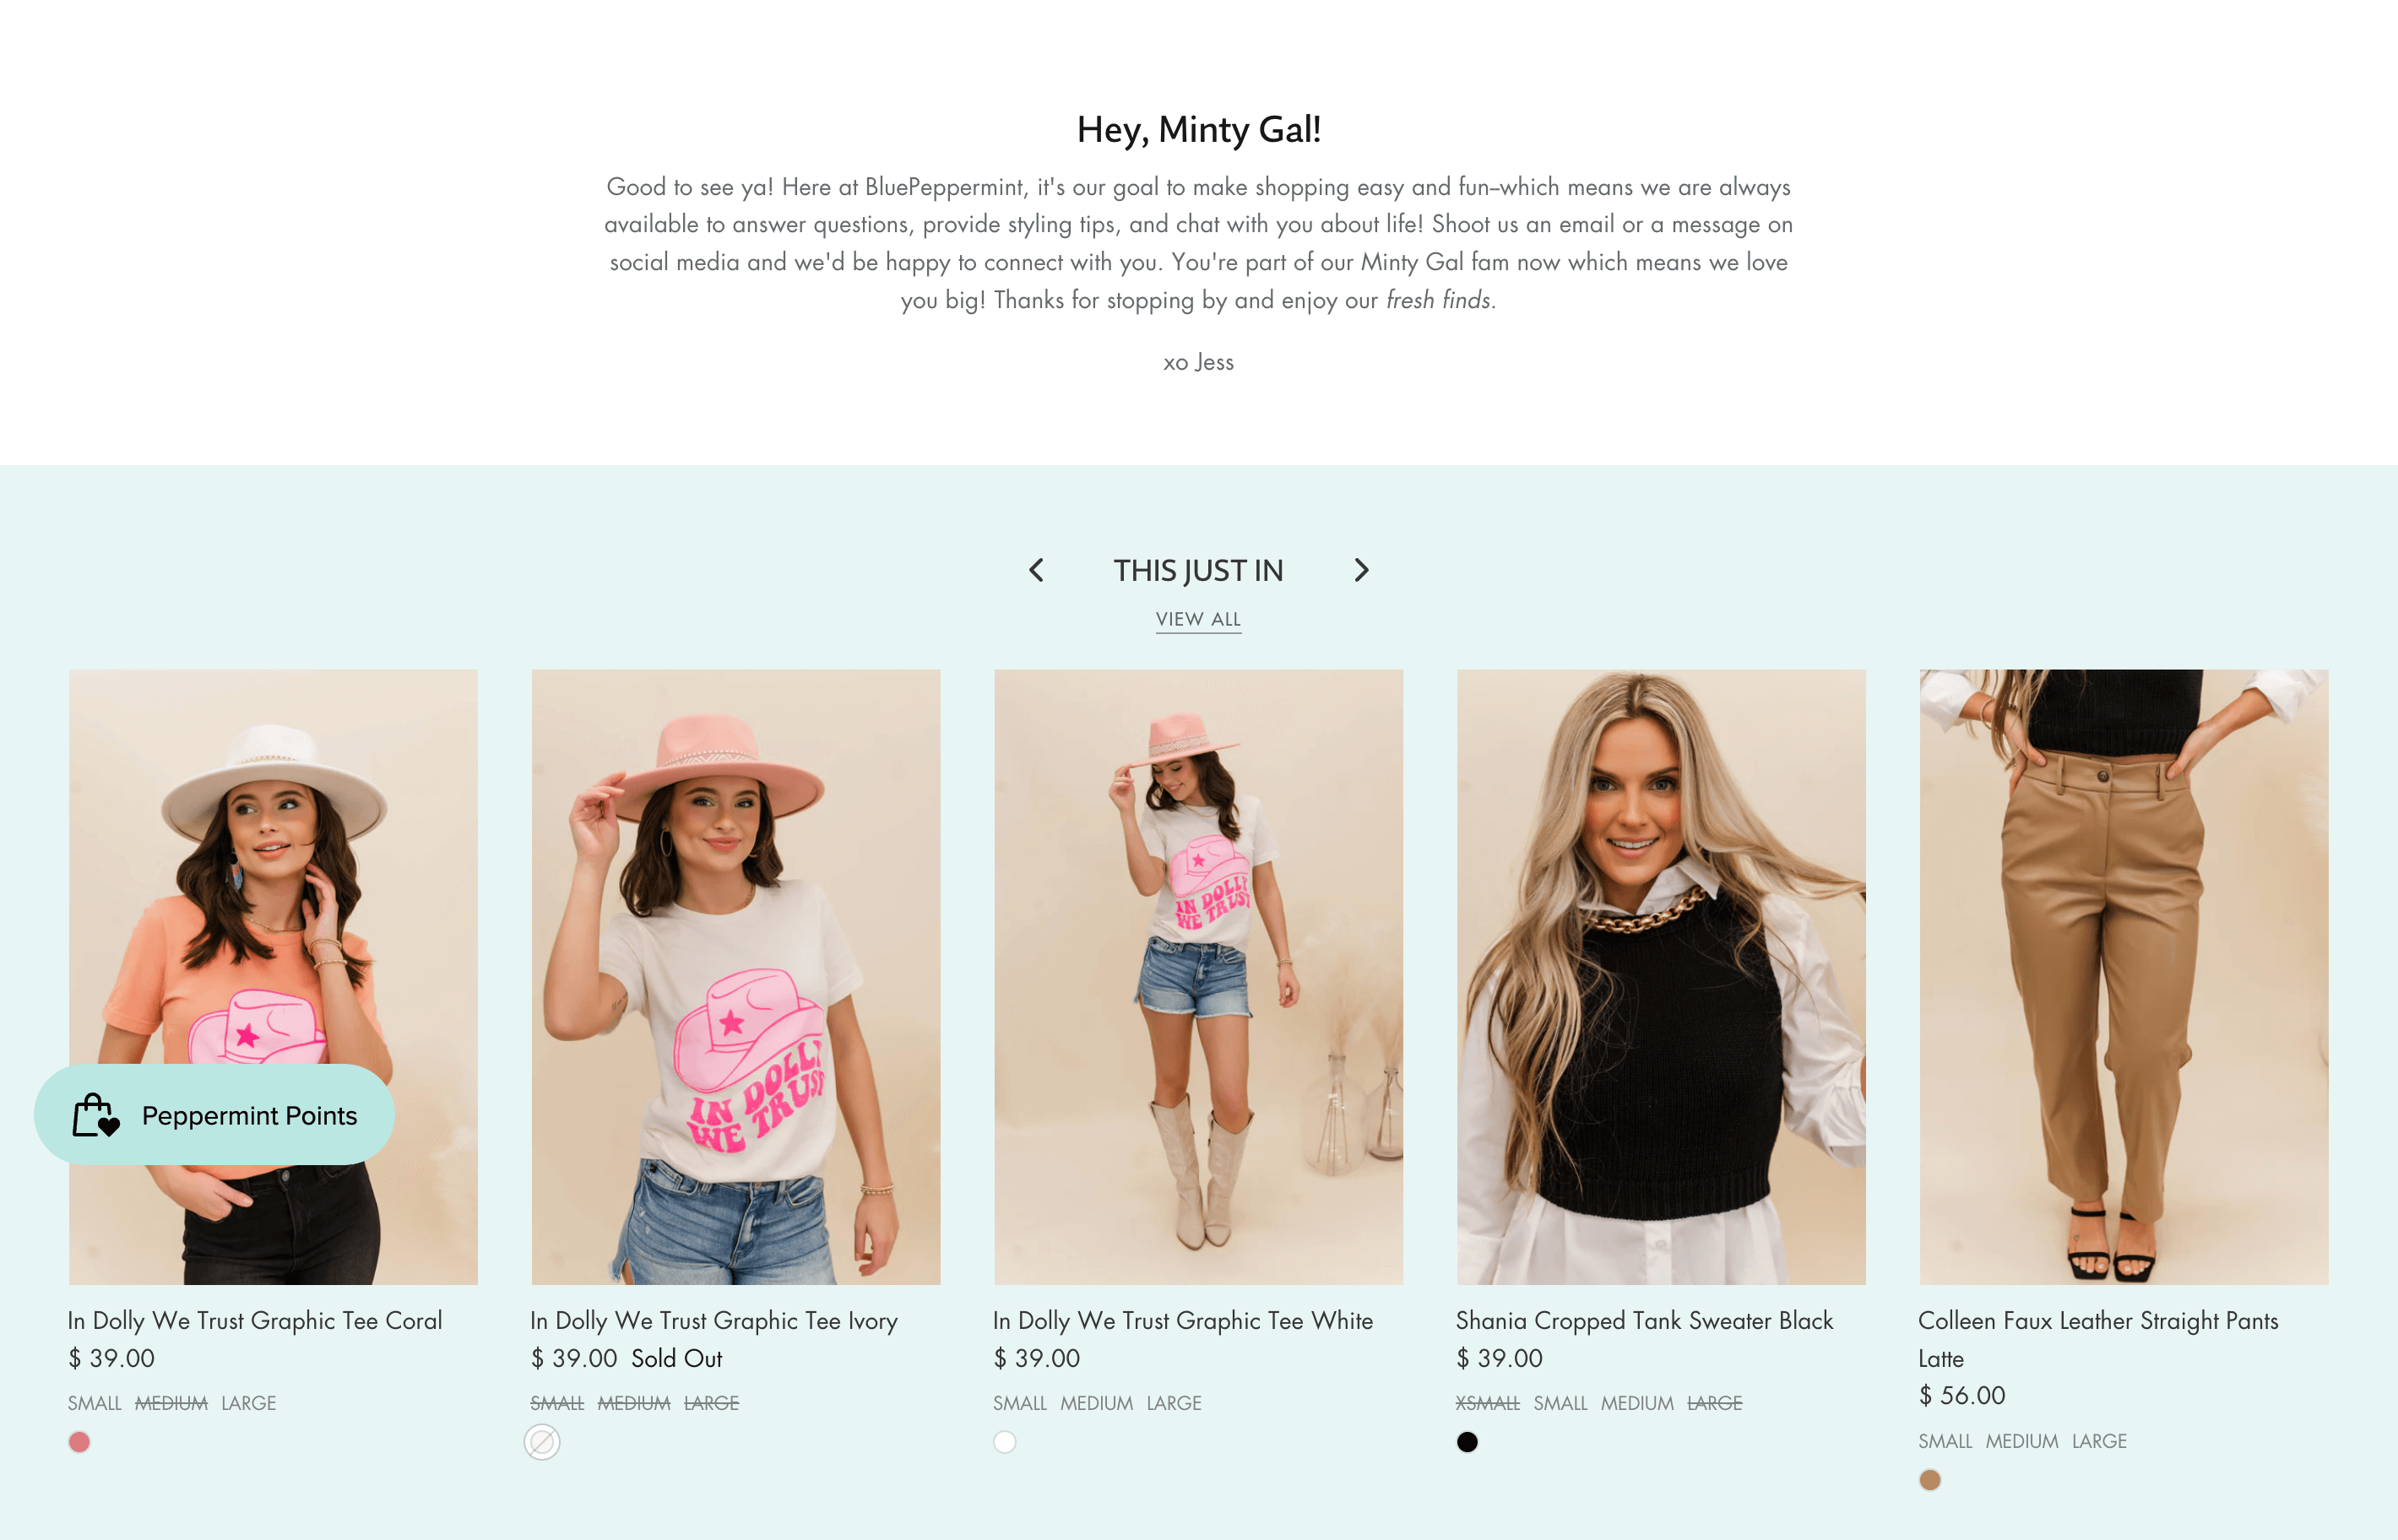 Women Ecommerce Entrepreneurs–A screenshot from Blue Peppermint Boutique’s homepage. There is a message that is titled, “Hey, Minty Gal!”. There are then 5 product images of women wearing different clothing items. 